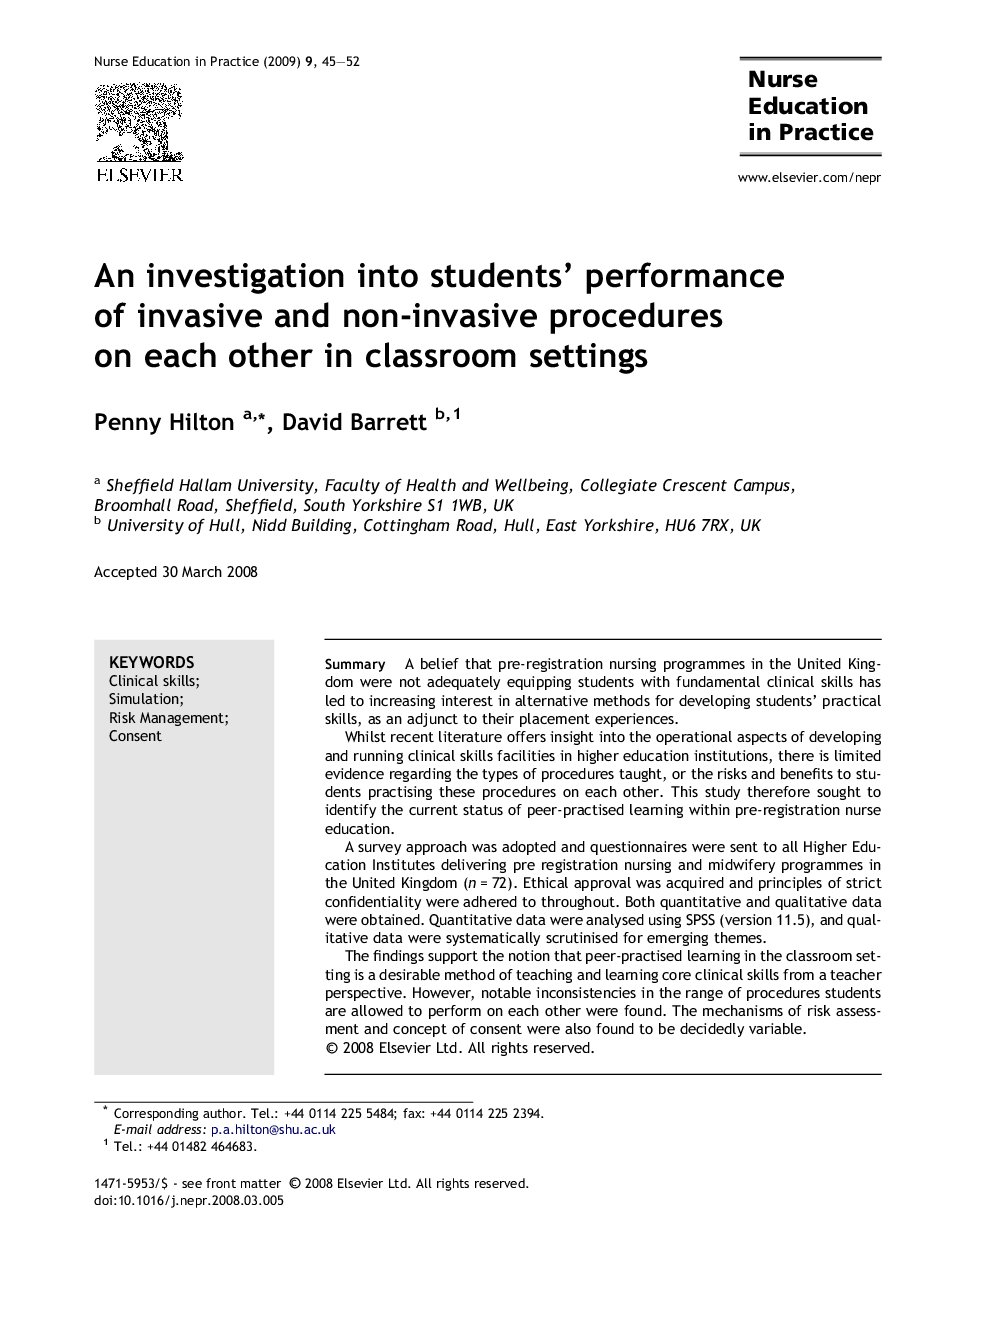 An investigation into students’ performance of invasive and non-invasive procedures on each other in classroom settings